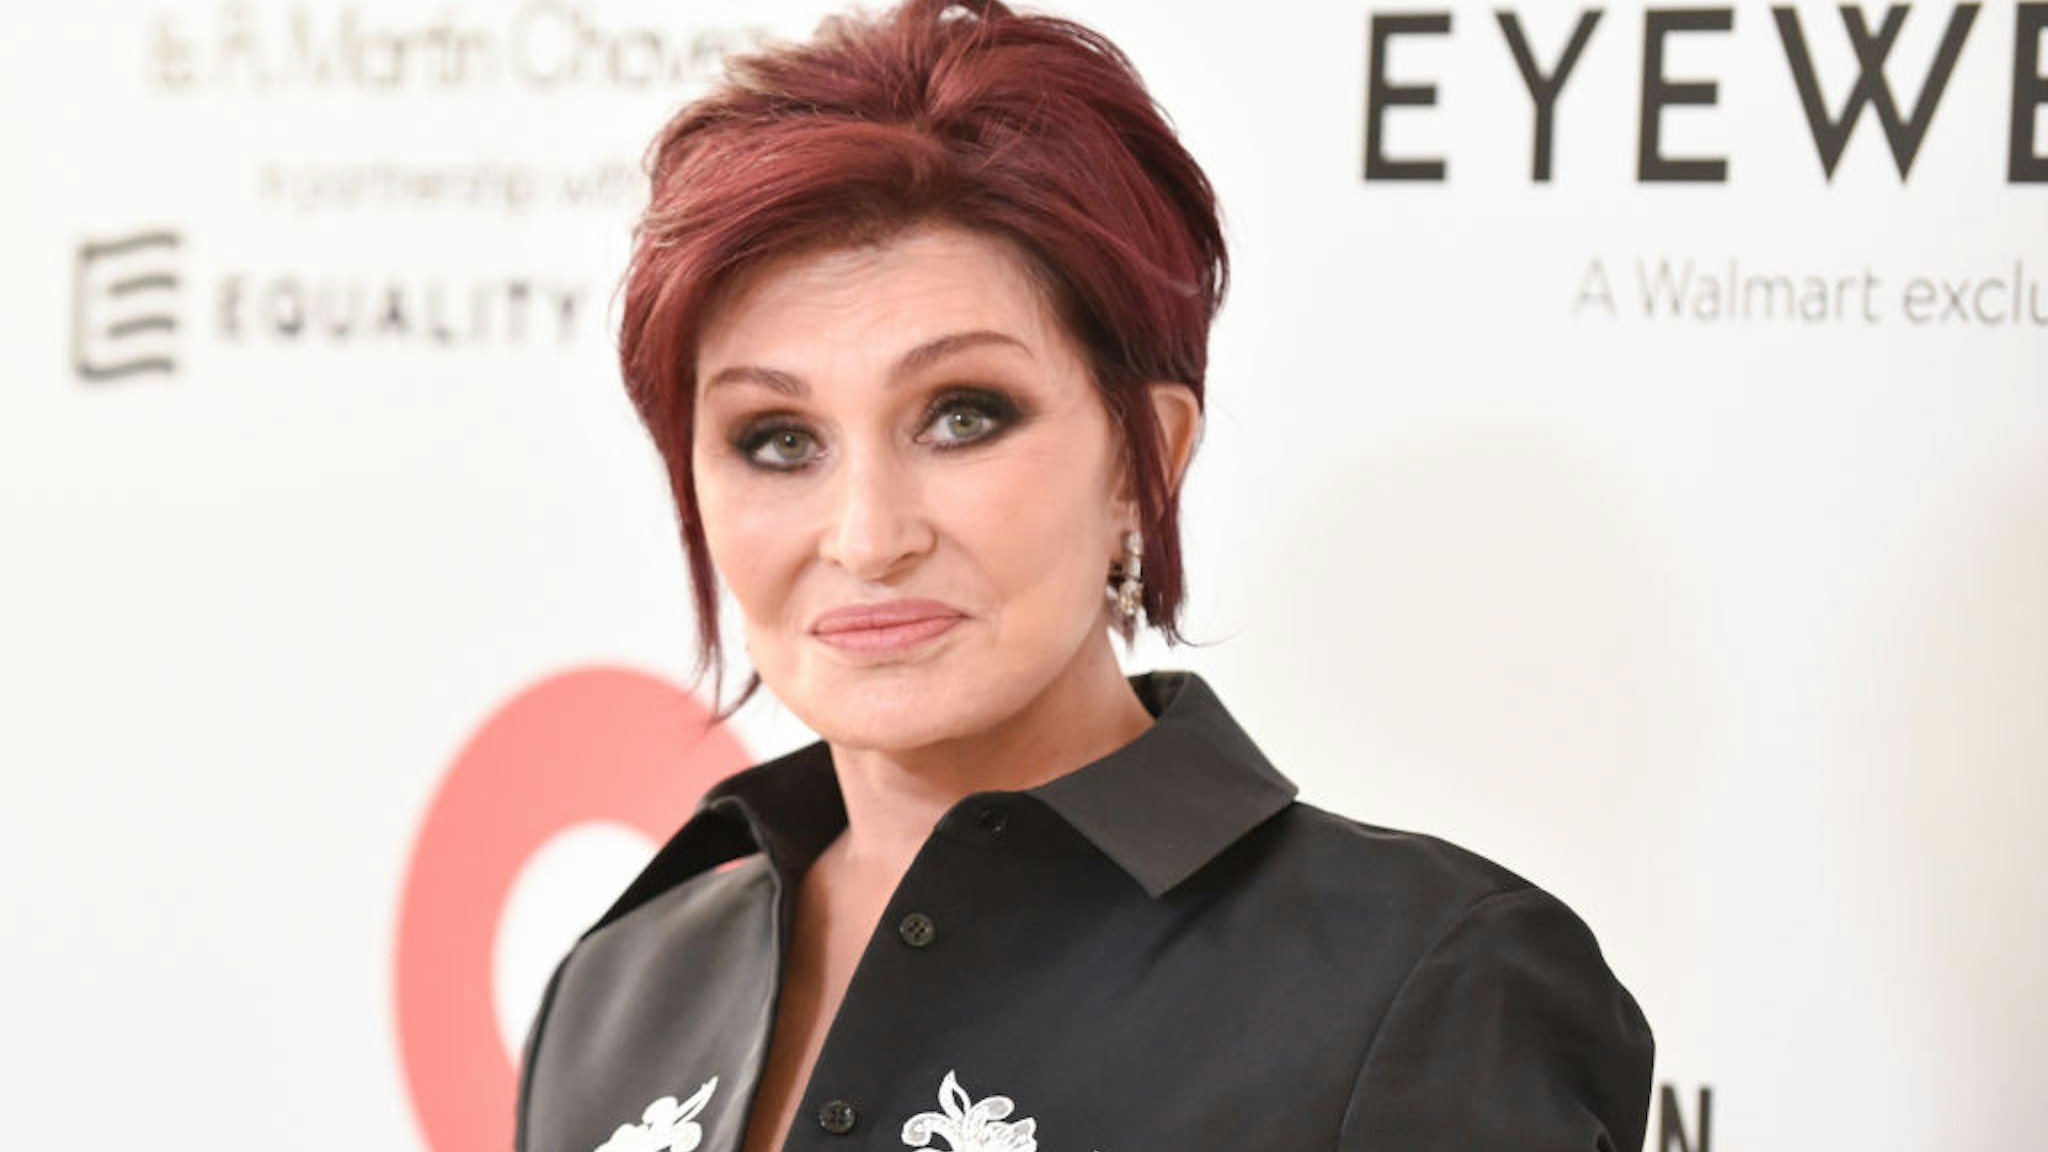 WEST HOLLYWOOD, CALIFORNIA - MARCH 27: Sharon Osbourne attends Elton John AIDS Foundation's 30th Annual Academy Awards Viewing Party on March 27, 2022 in West Hollywood, California. (Photo by Rodin Eckenroth/WireImage)